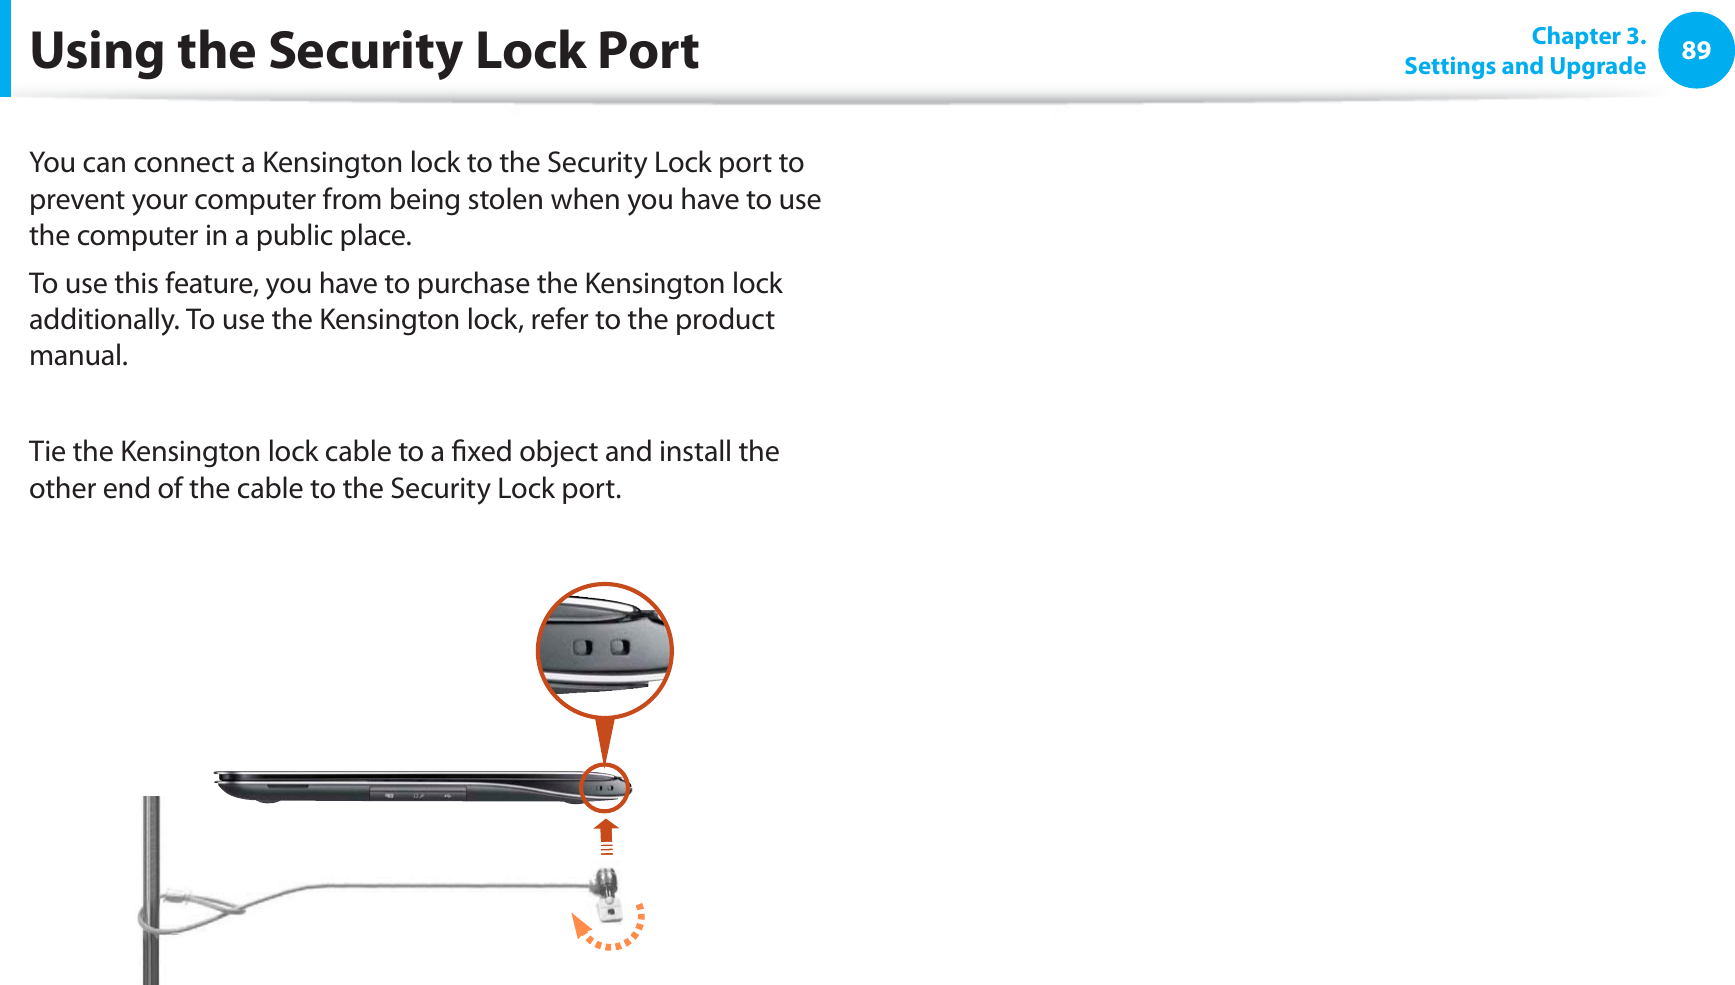 89Chapter 3. Settings and UpgradeUsing the Security Lock PortYou can connect a Kensington lock to the Security Lock port to prevent your computer from being stolen when you have to use the computer in a public place.To use this feature, you have to purchase the Kensington lock additionally. To use the Kensington lock, refer to the product manual.Tie the Kensington lock cable to a xed object and install the other end of the cable to the Security Lock port.